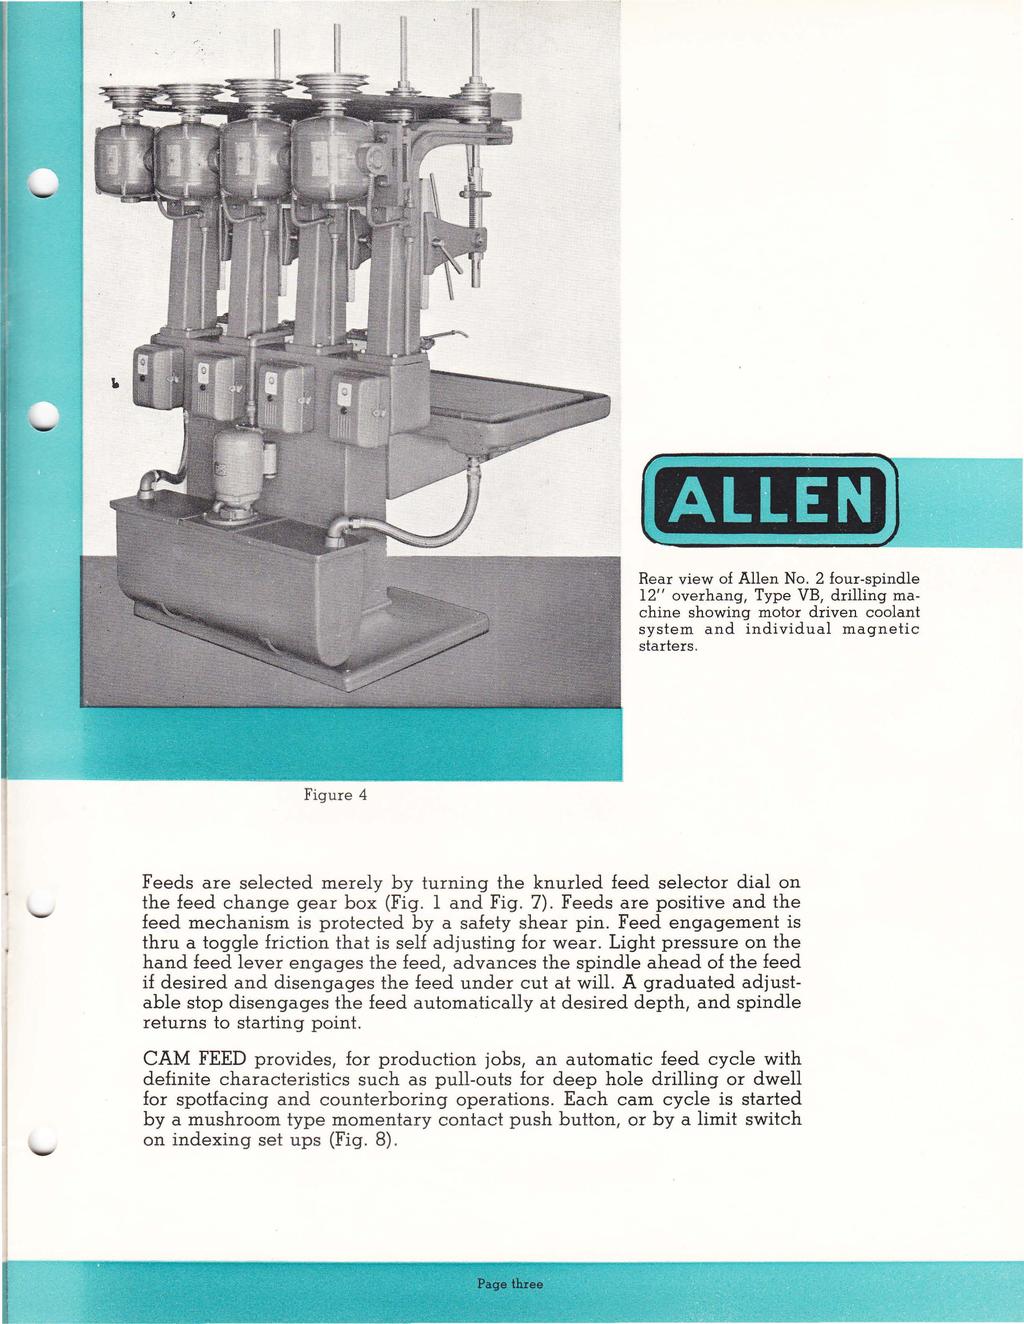 Rear view of Allen No. 2 four-spindle 12" overhang, Type VB, drilling machine showing motor driven coolant system and individual magnetic starters.